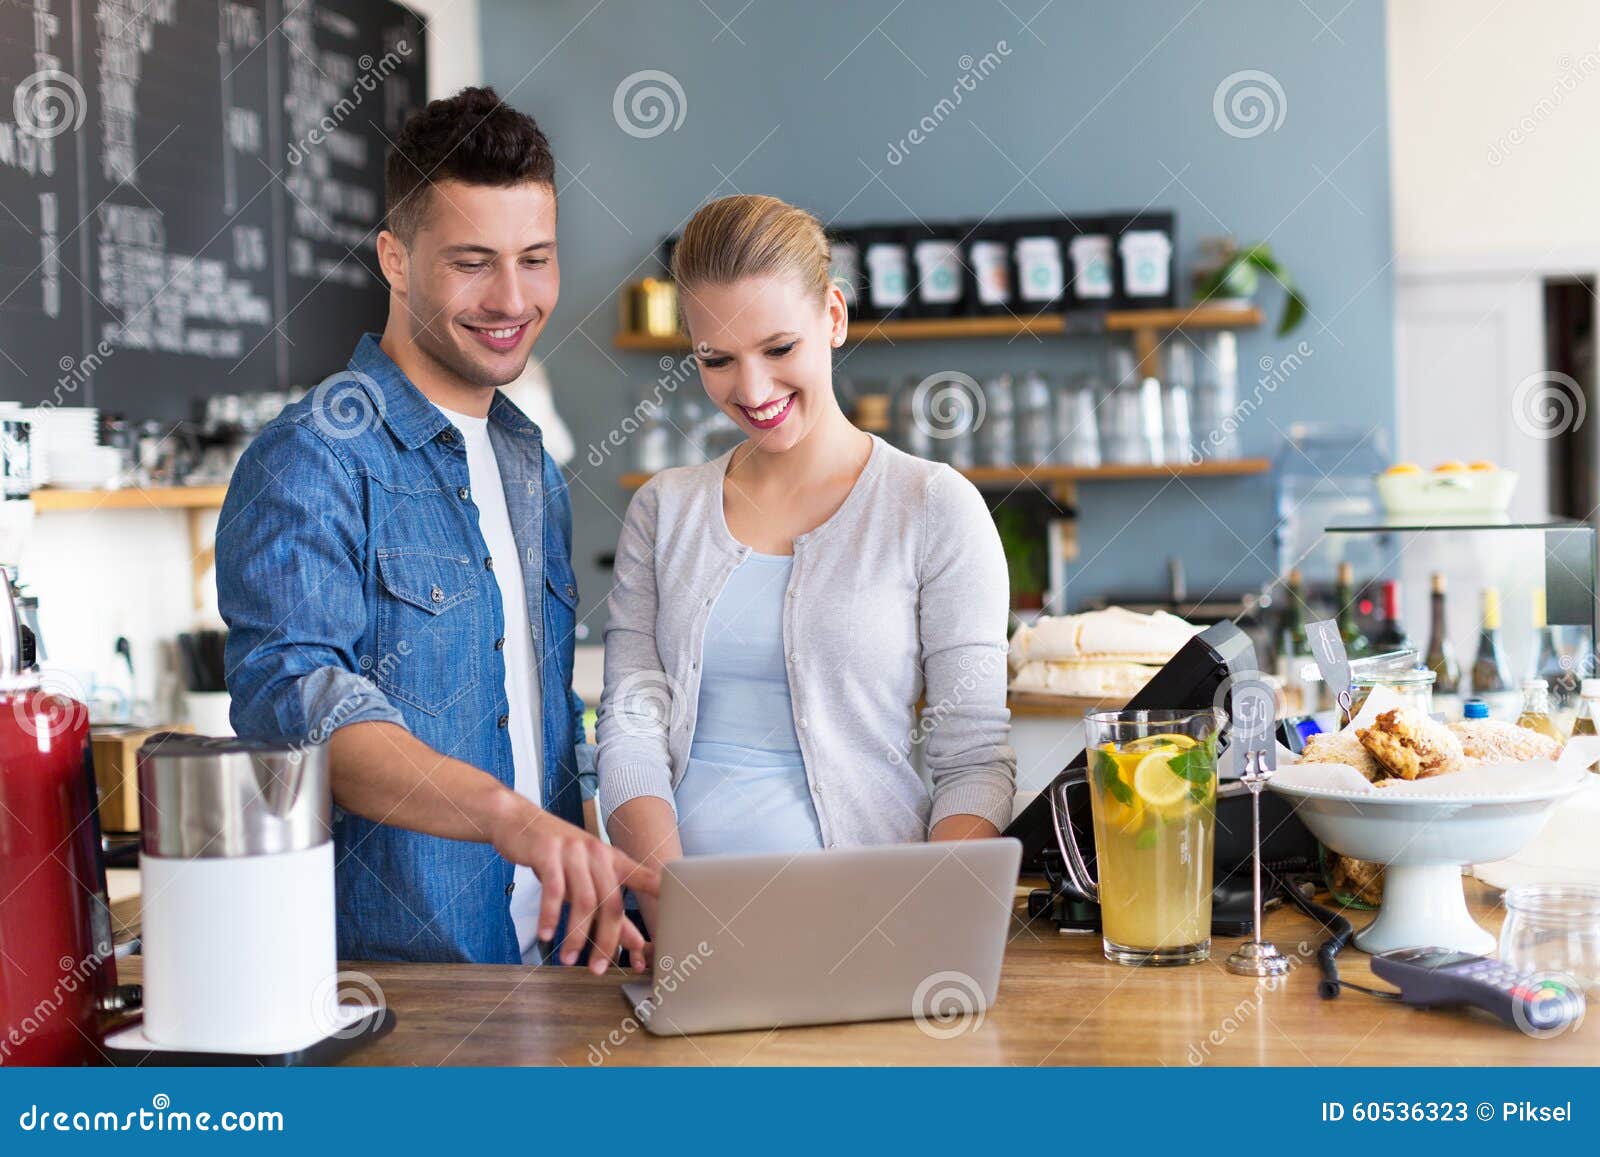 small business owners in coffee shop